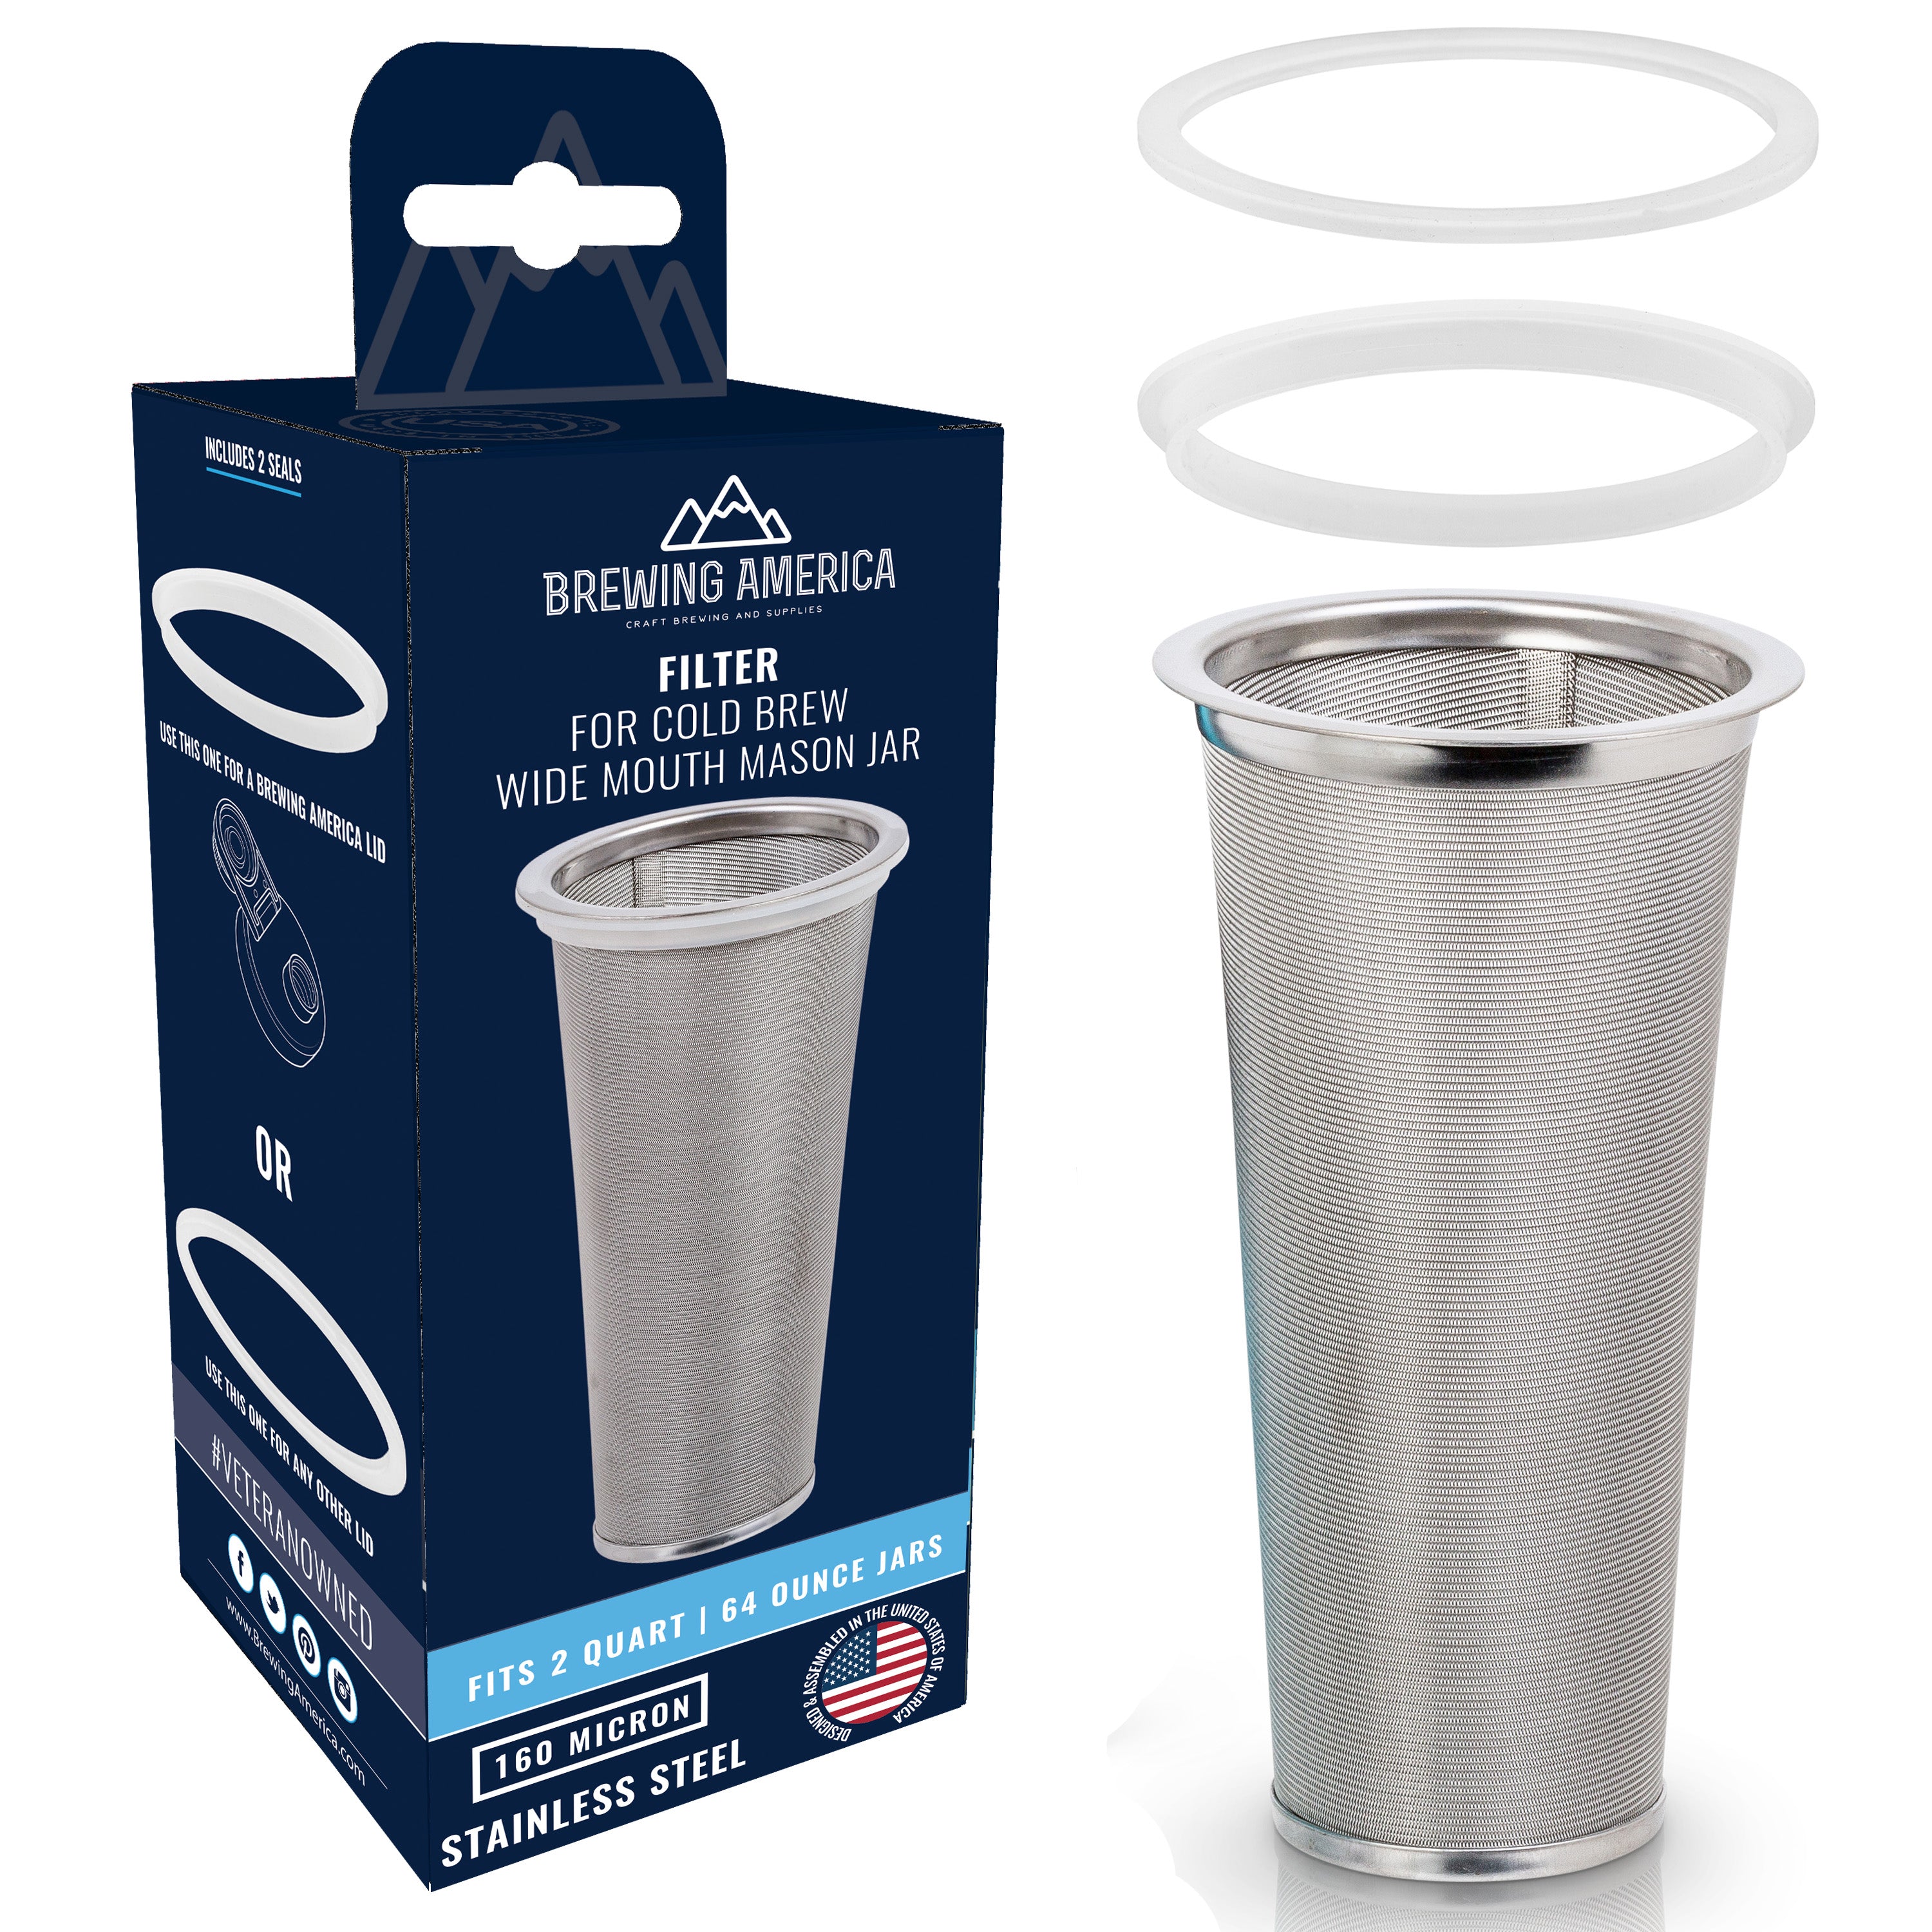 Cold Brew Filter for Mason Jar Wide Mouth Coffee Maker, Stainless Steel (2 Quart (64 Ounces) Accessories Brewing America 